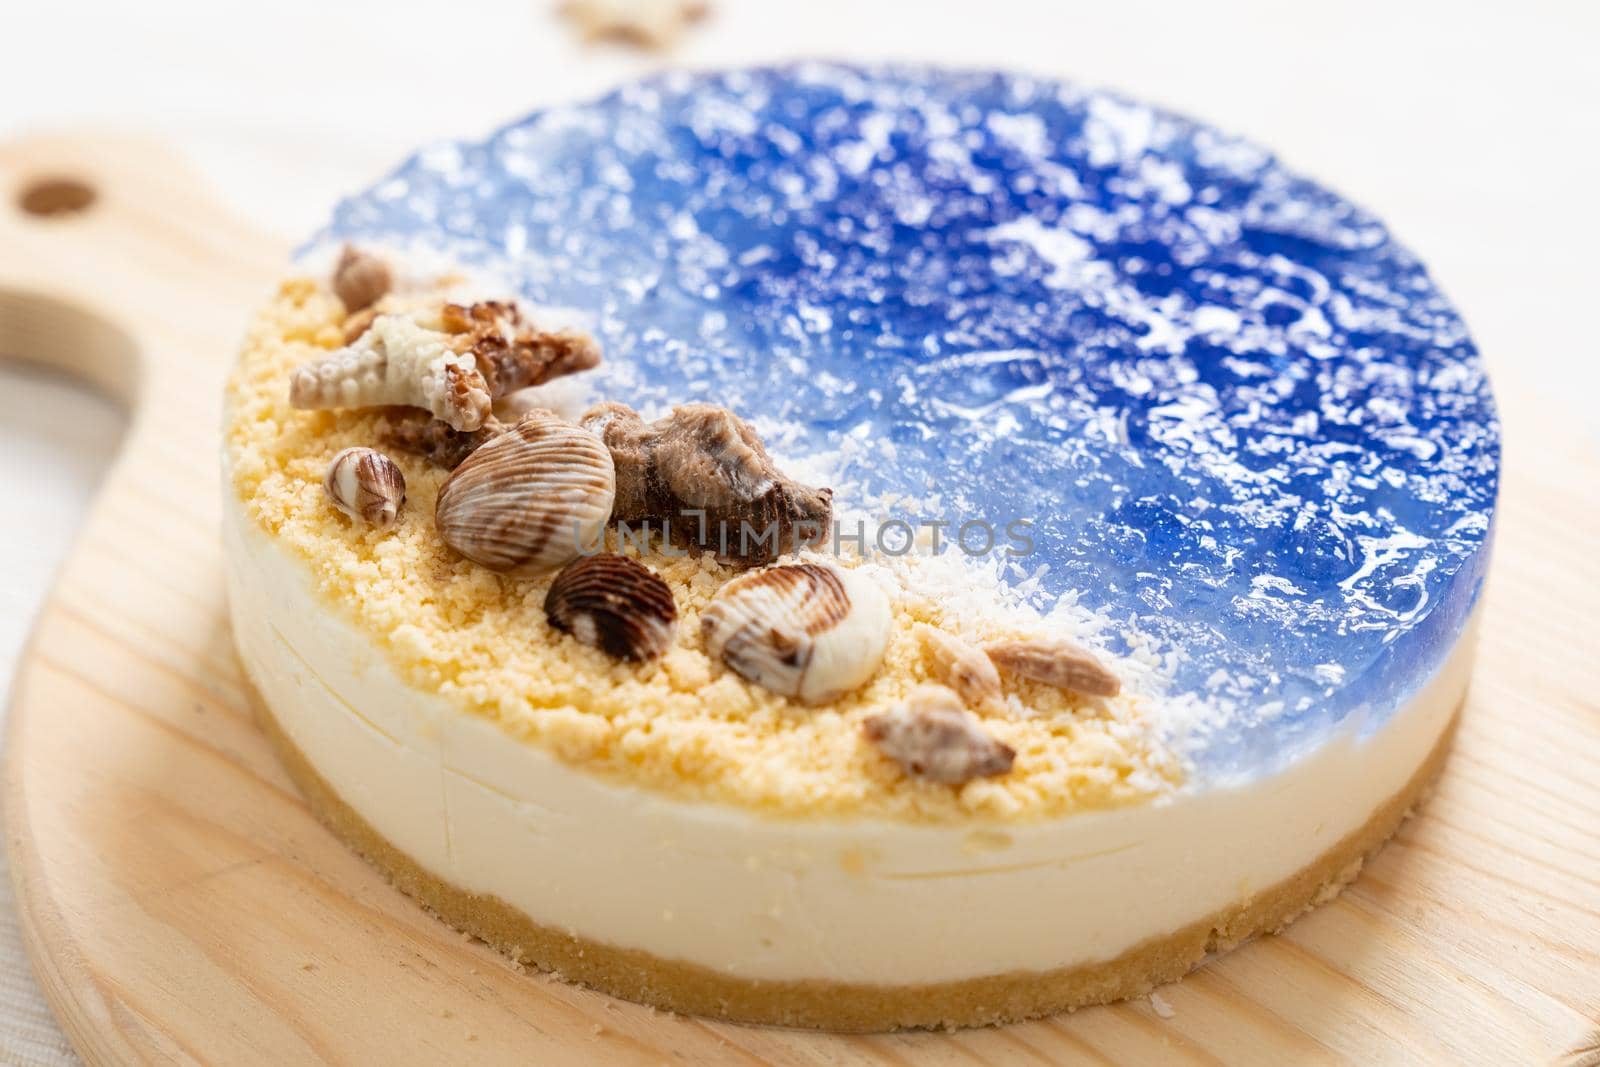 No baked ocean blue cheese cake with chocolate seashells decoration by Kenishirotie